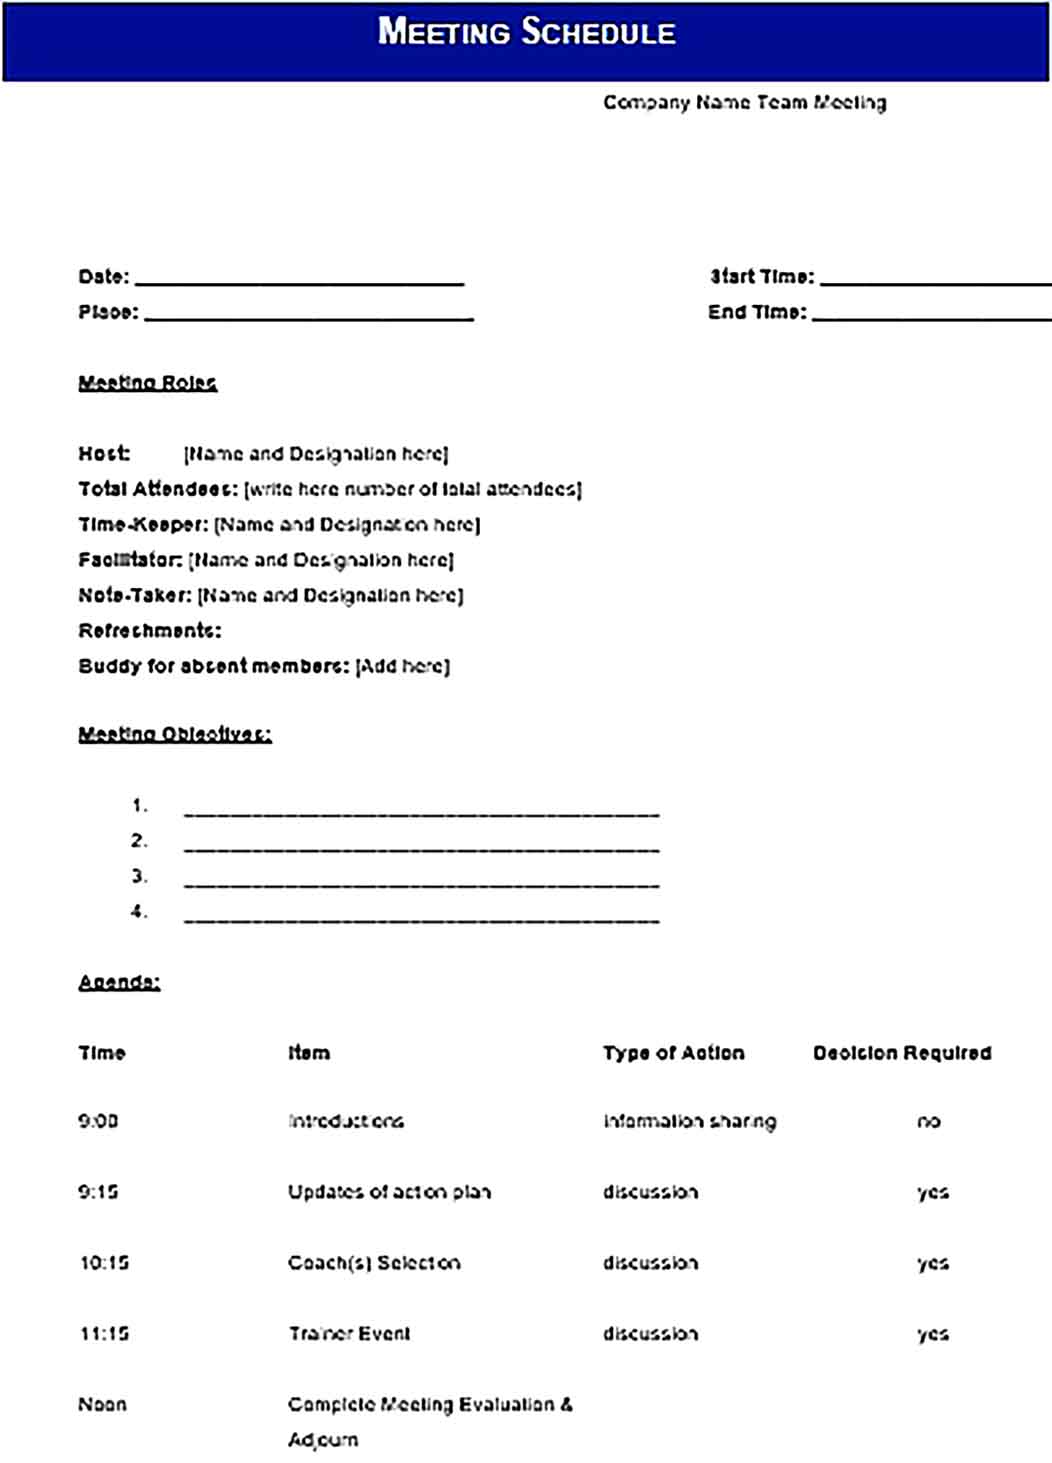 Template Company Meeting Schedule Word Doc Sample